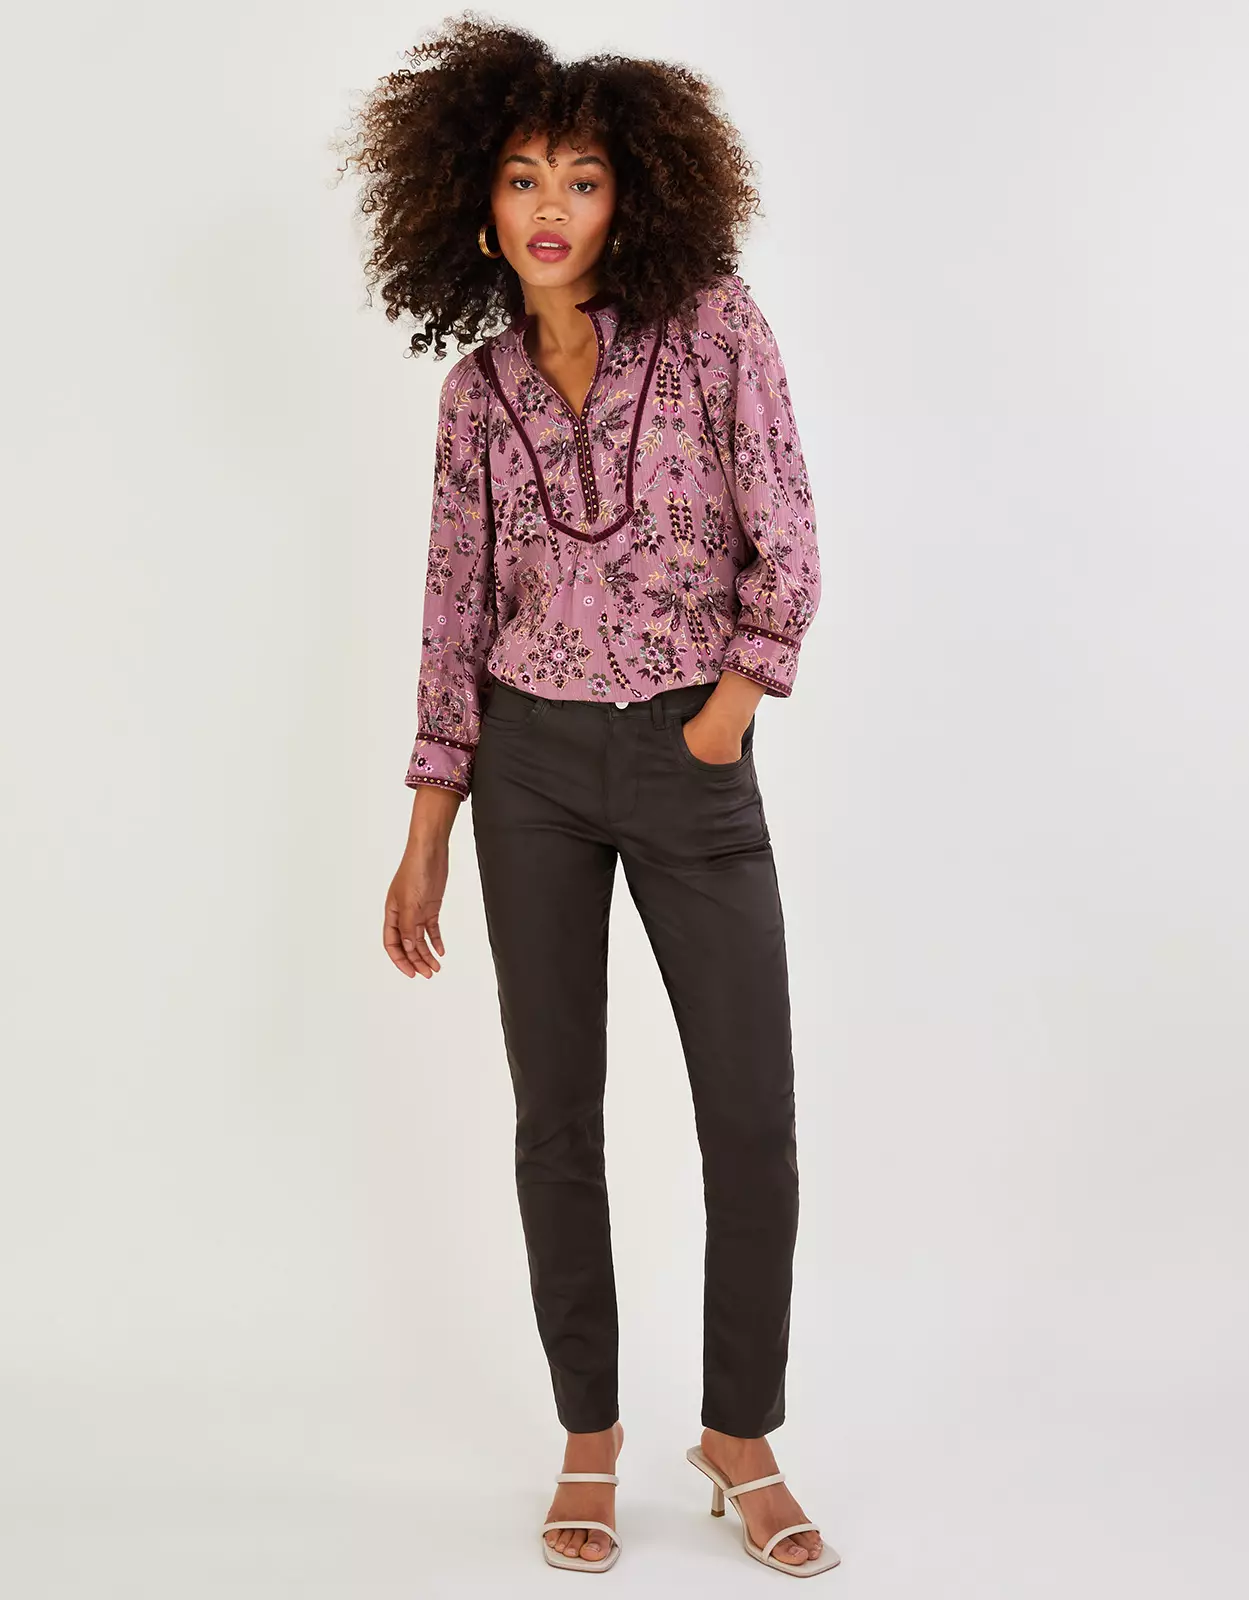 VICI Conquer High Rise Coated Skinny Jeans